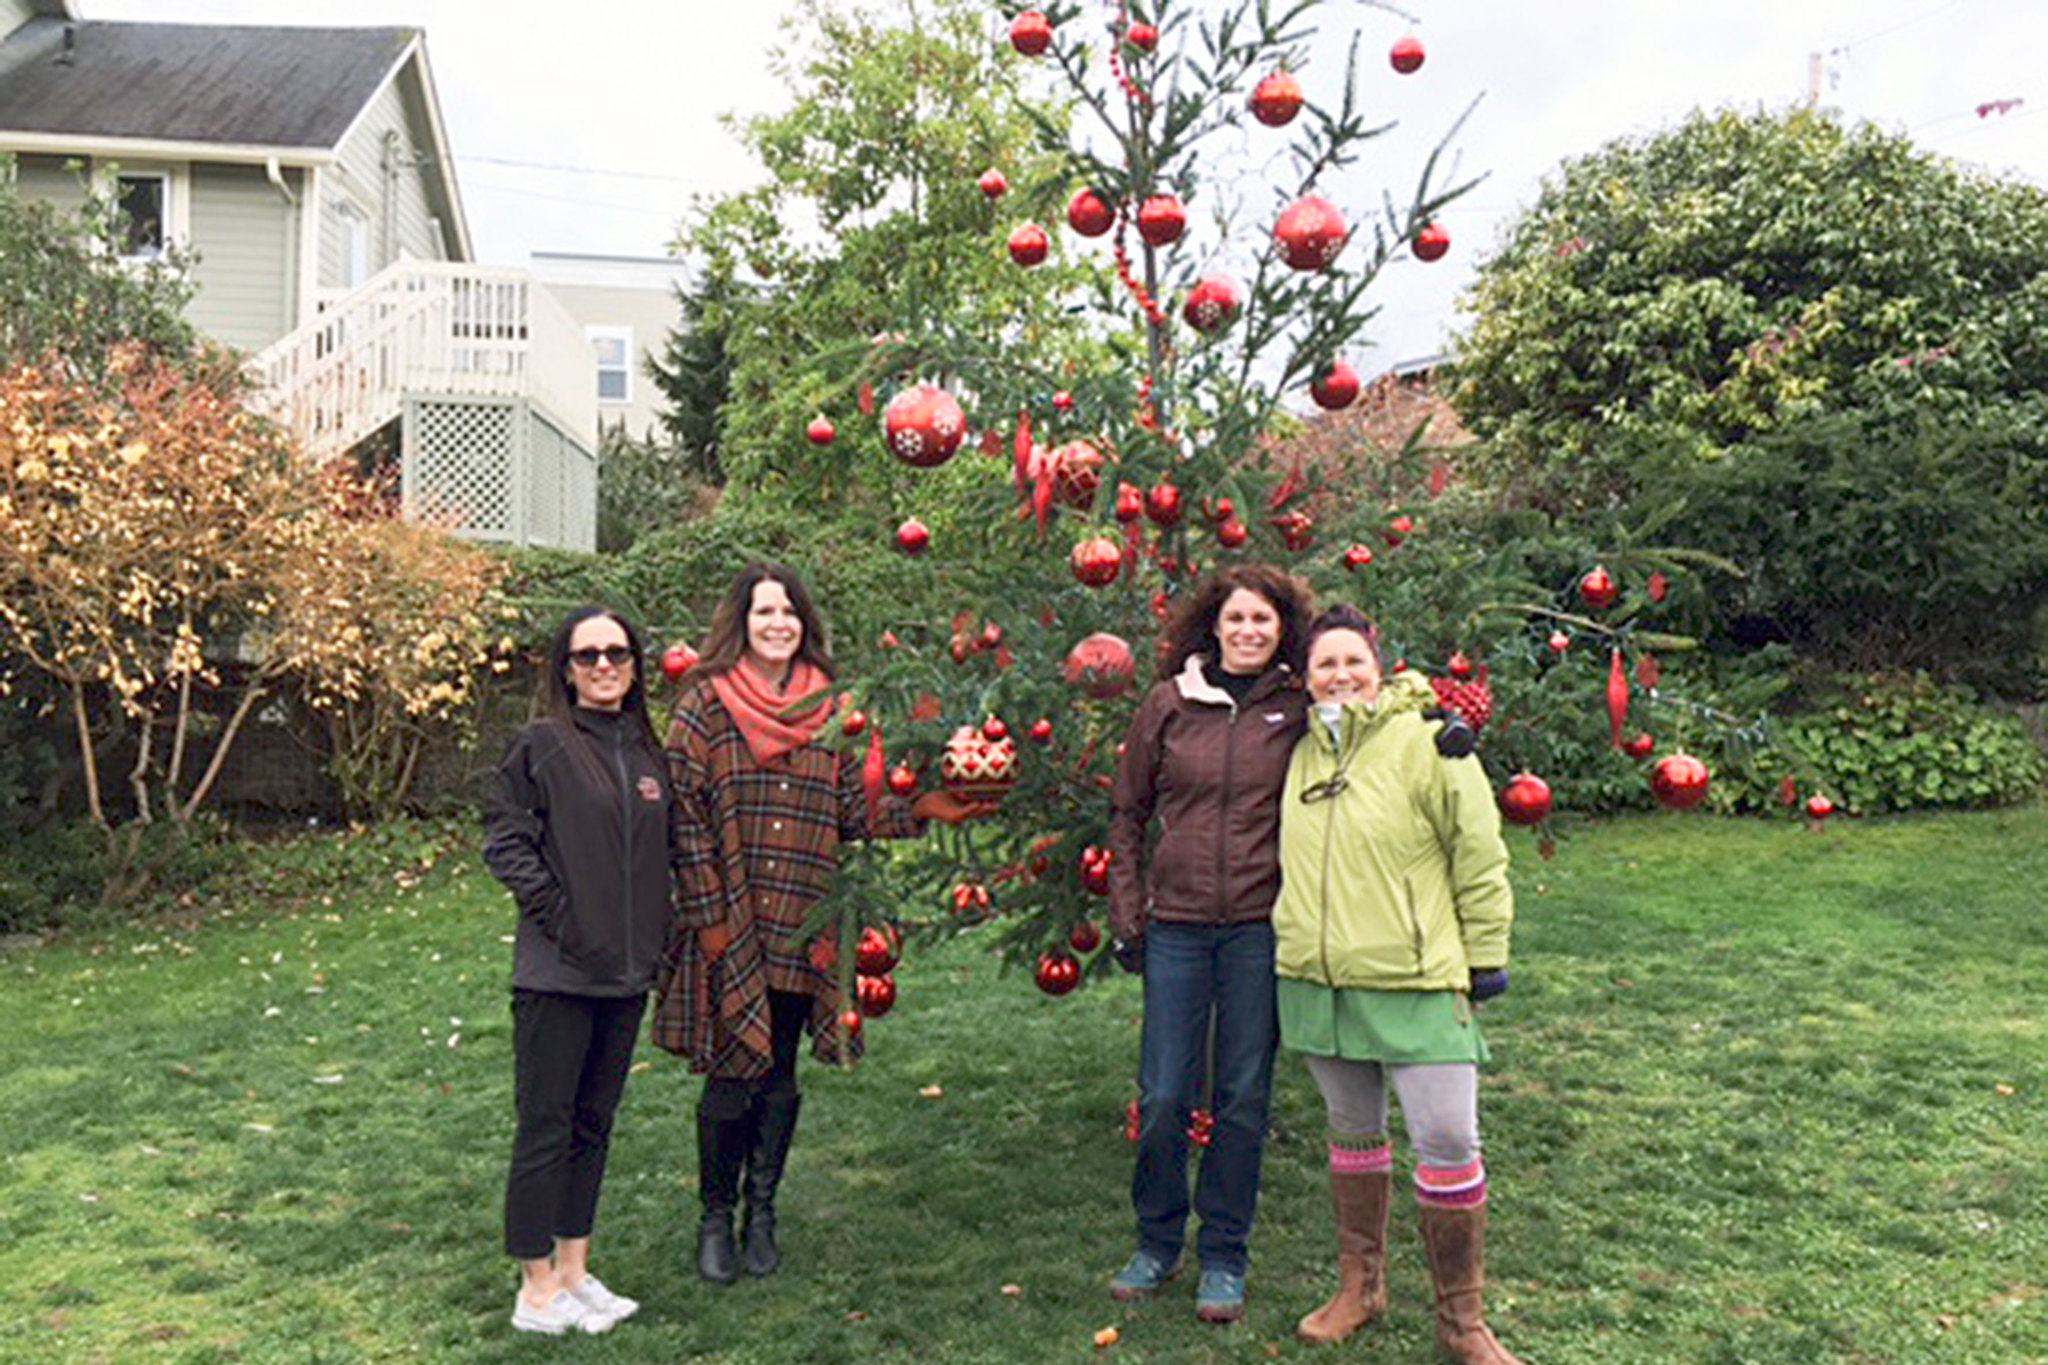 Contributed photo                                Langley Chamber of Commerce representatives Ursula Shoudy, Michaleen McGarry, Robin Black and Lilly van Gerbig stand next to a Douglas fir tree they decorated for the Lighting of Langley event on Nov. 26. The tree was donated by the Whidbey Camano Land Trust.